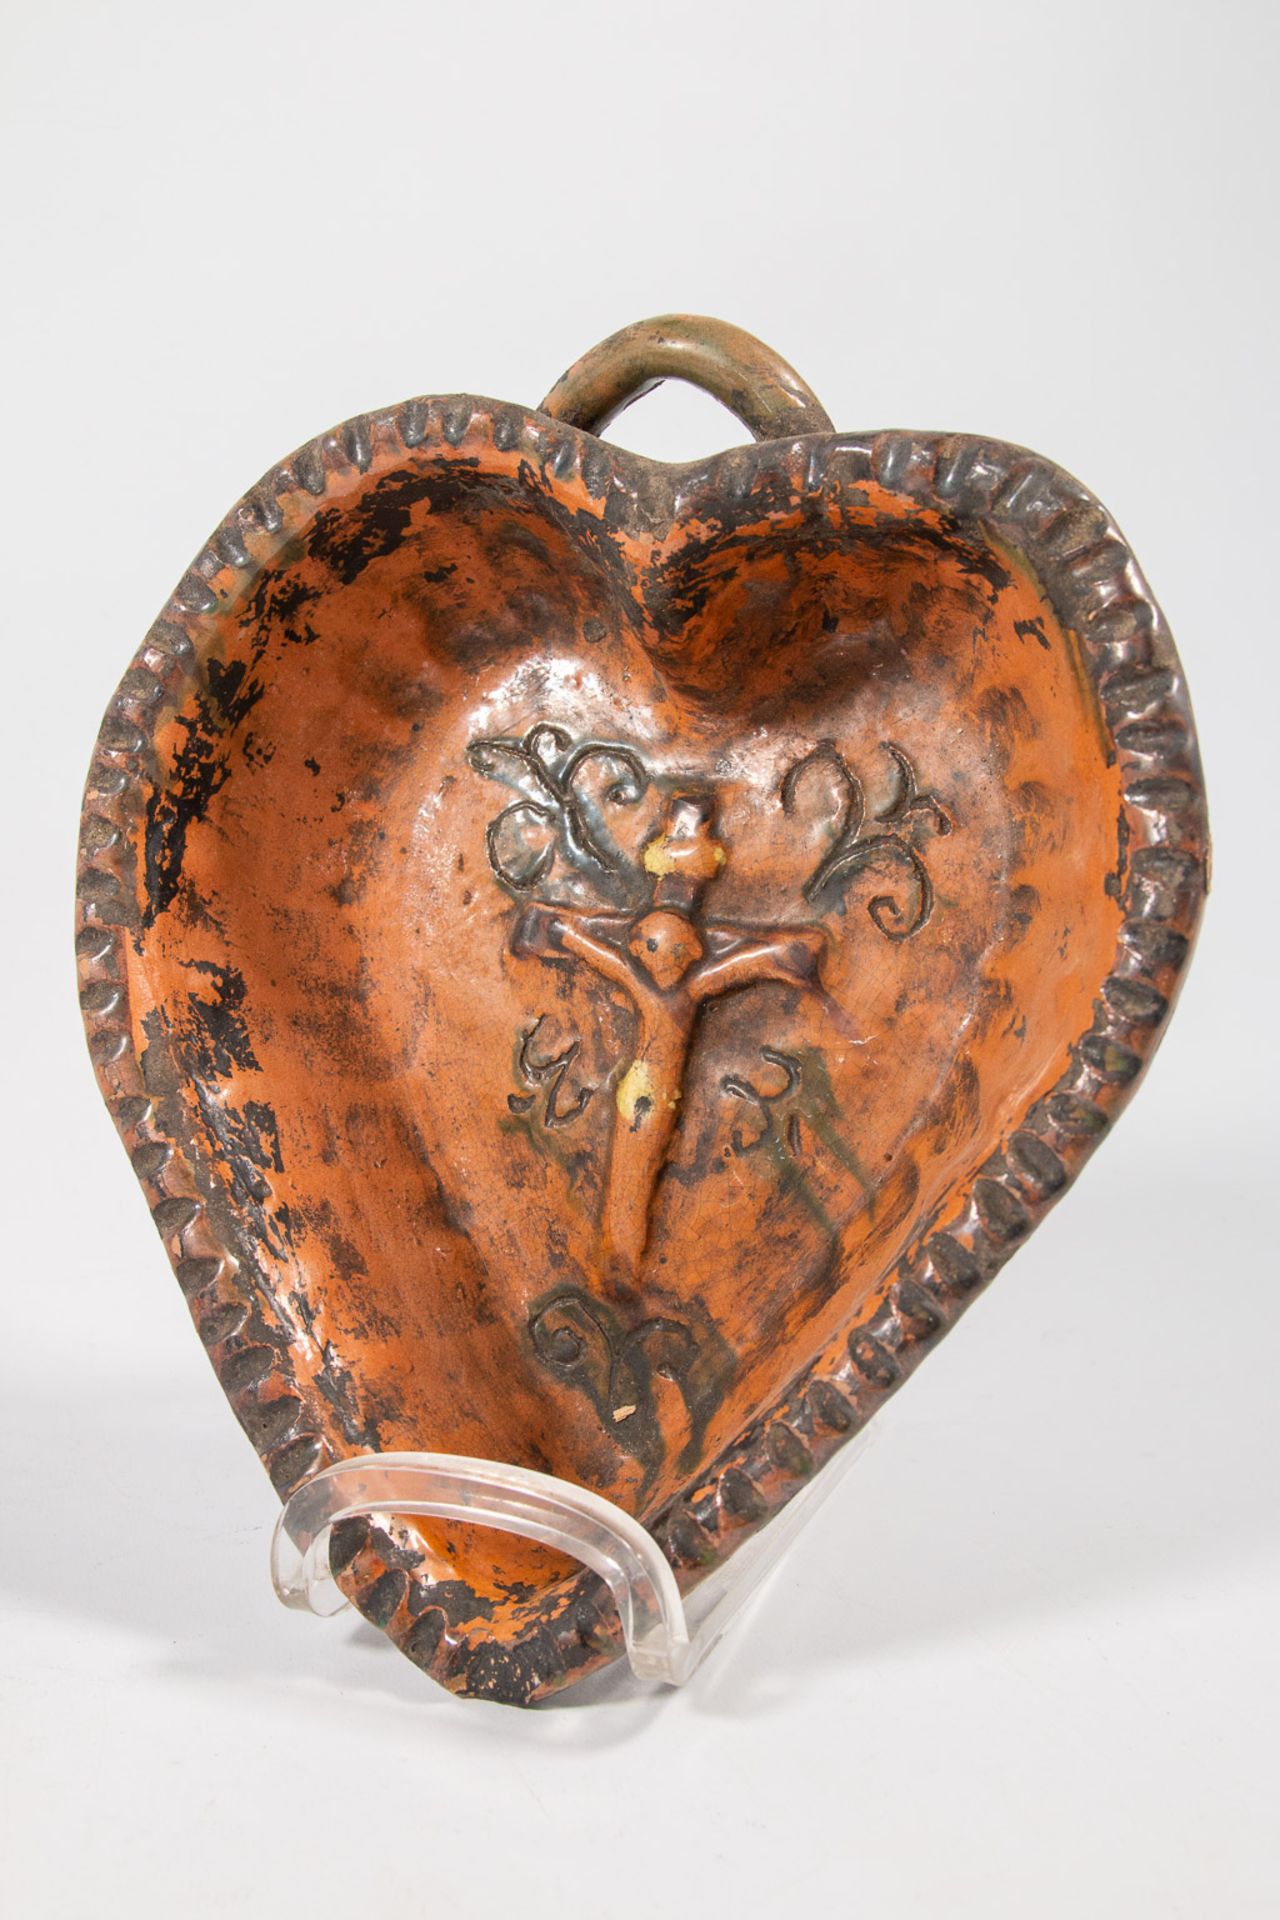 A Collection of 2 baking forms in shape of a heart - Image 19 of 27